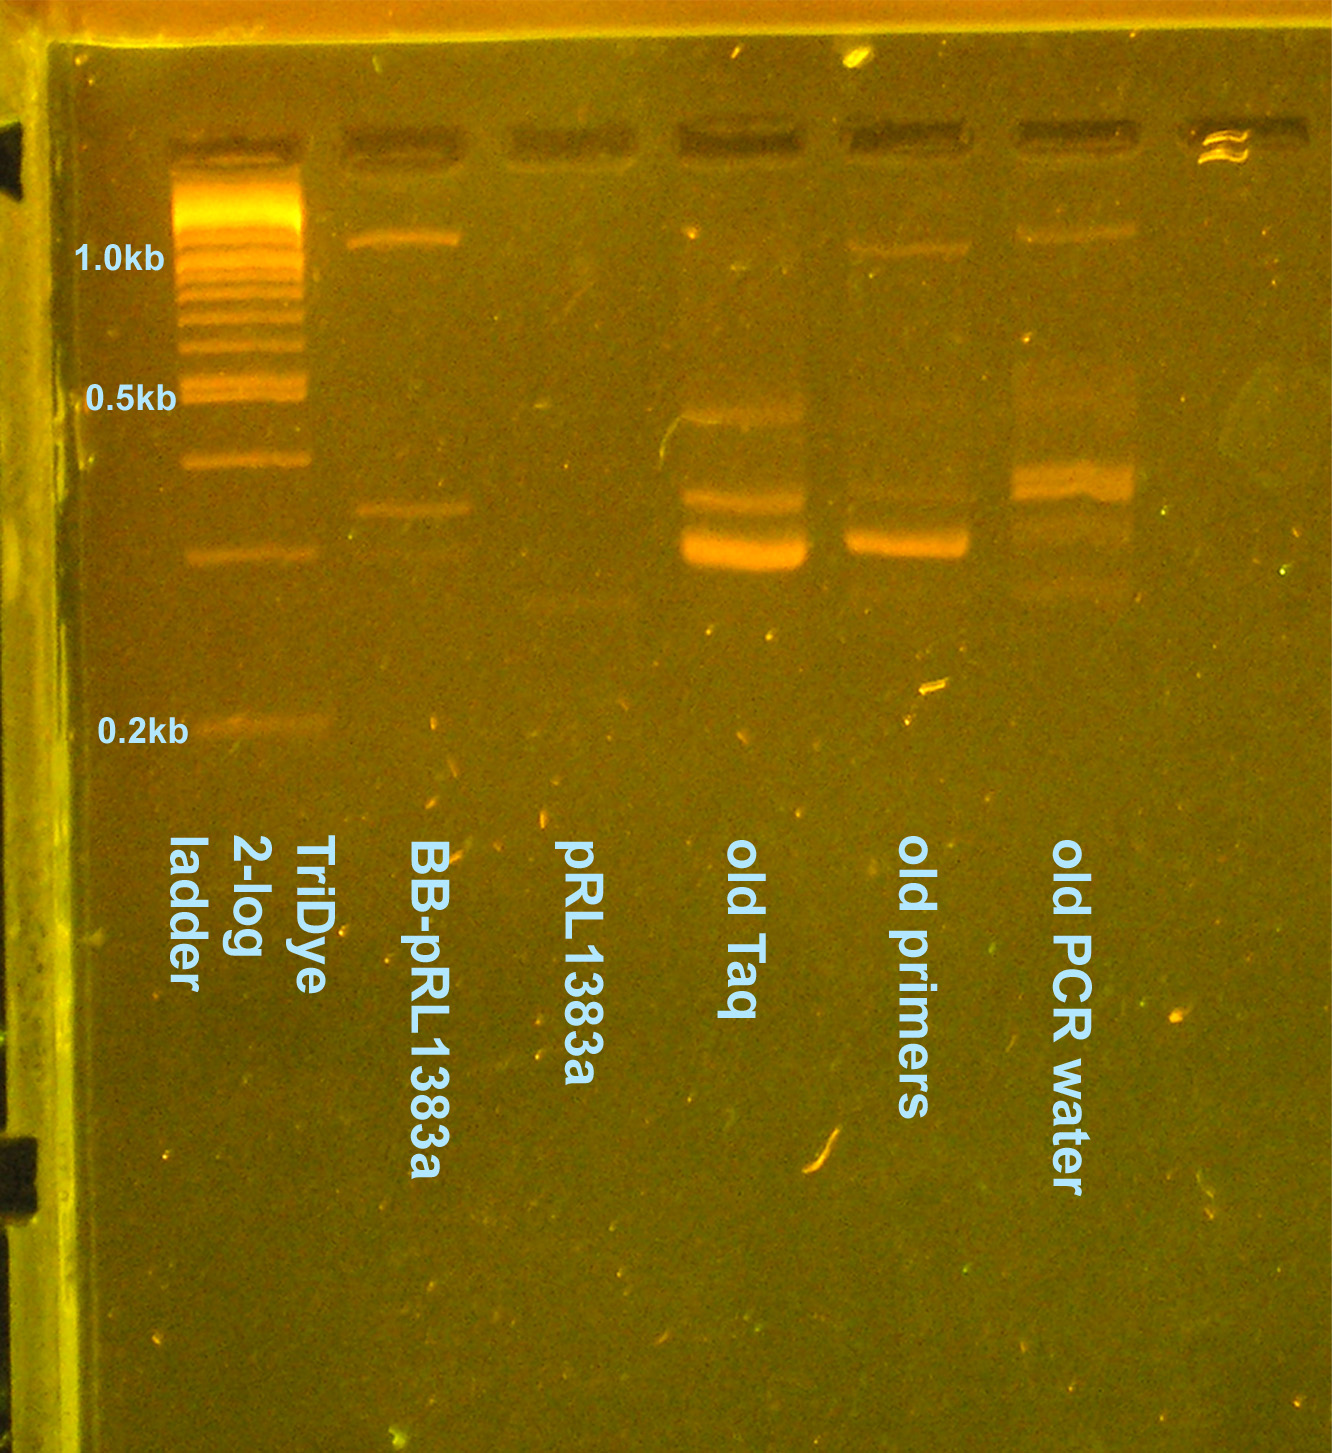 EtBr stained 2.5% agarose gel ran at 95V for 1 hour. Ten microliters of the PCR reactions were loaded inot each well.